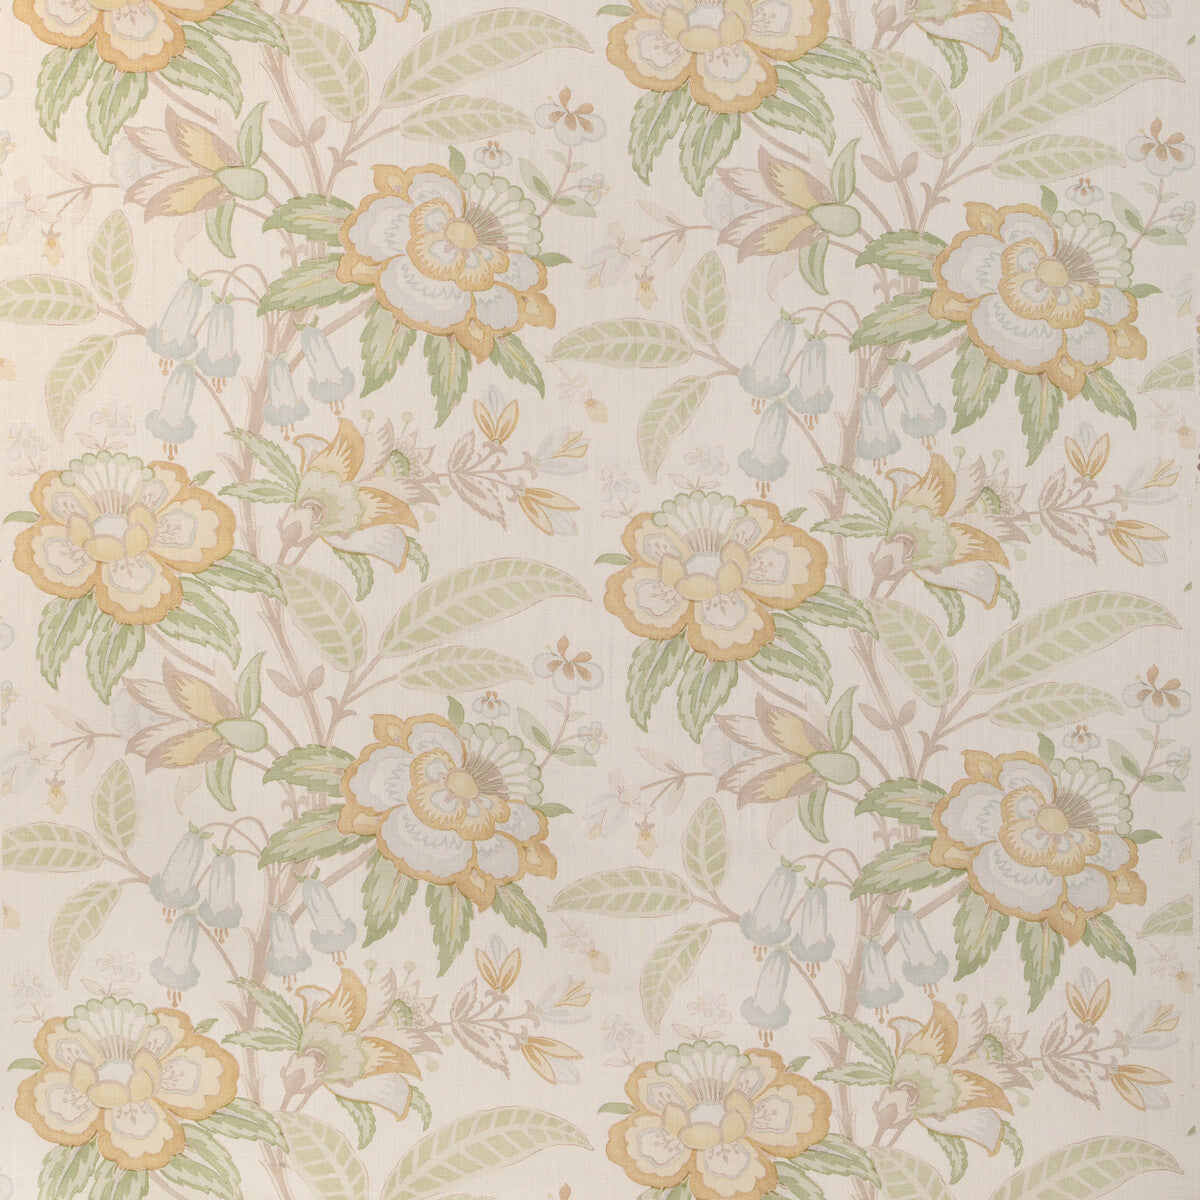 Davenport Print fabric in golden color - pattern 2017164.423.0 - by Lee Jofa in the Garden Walk collection